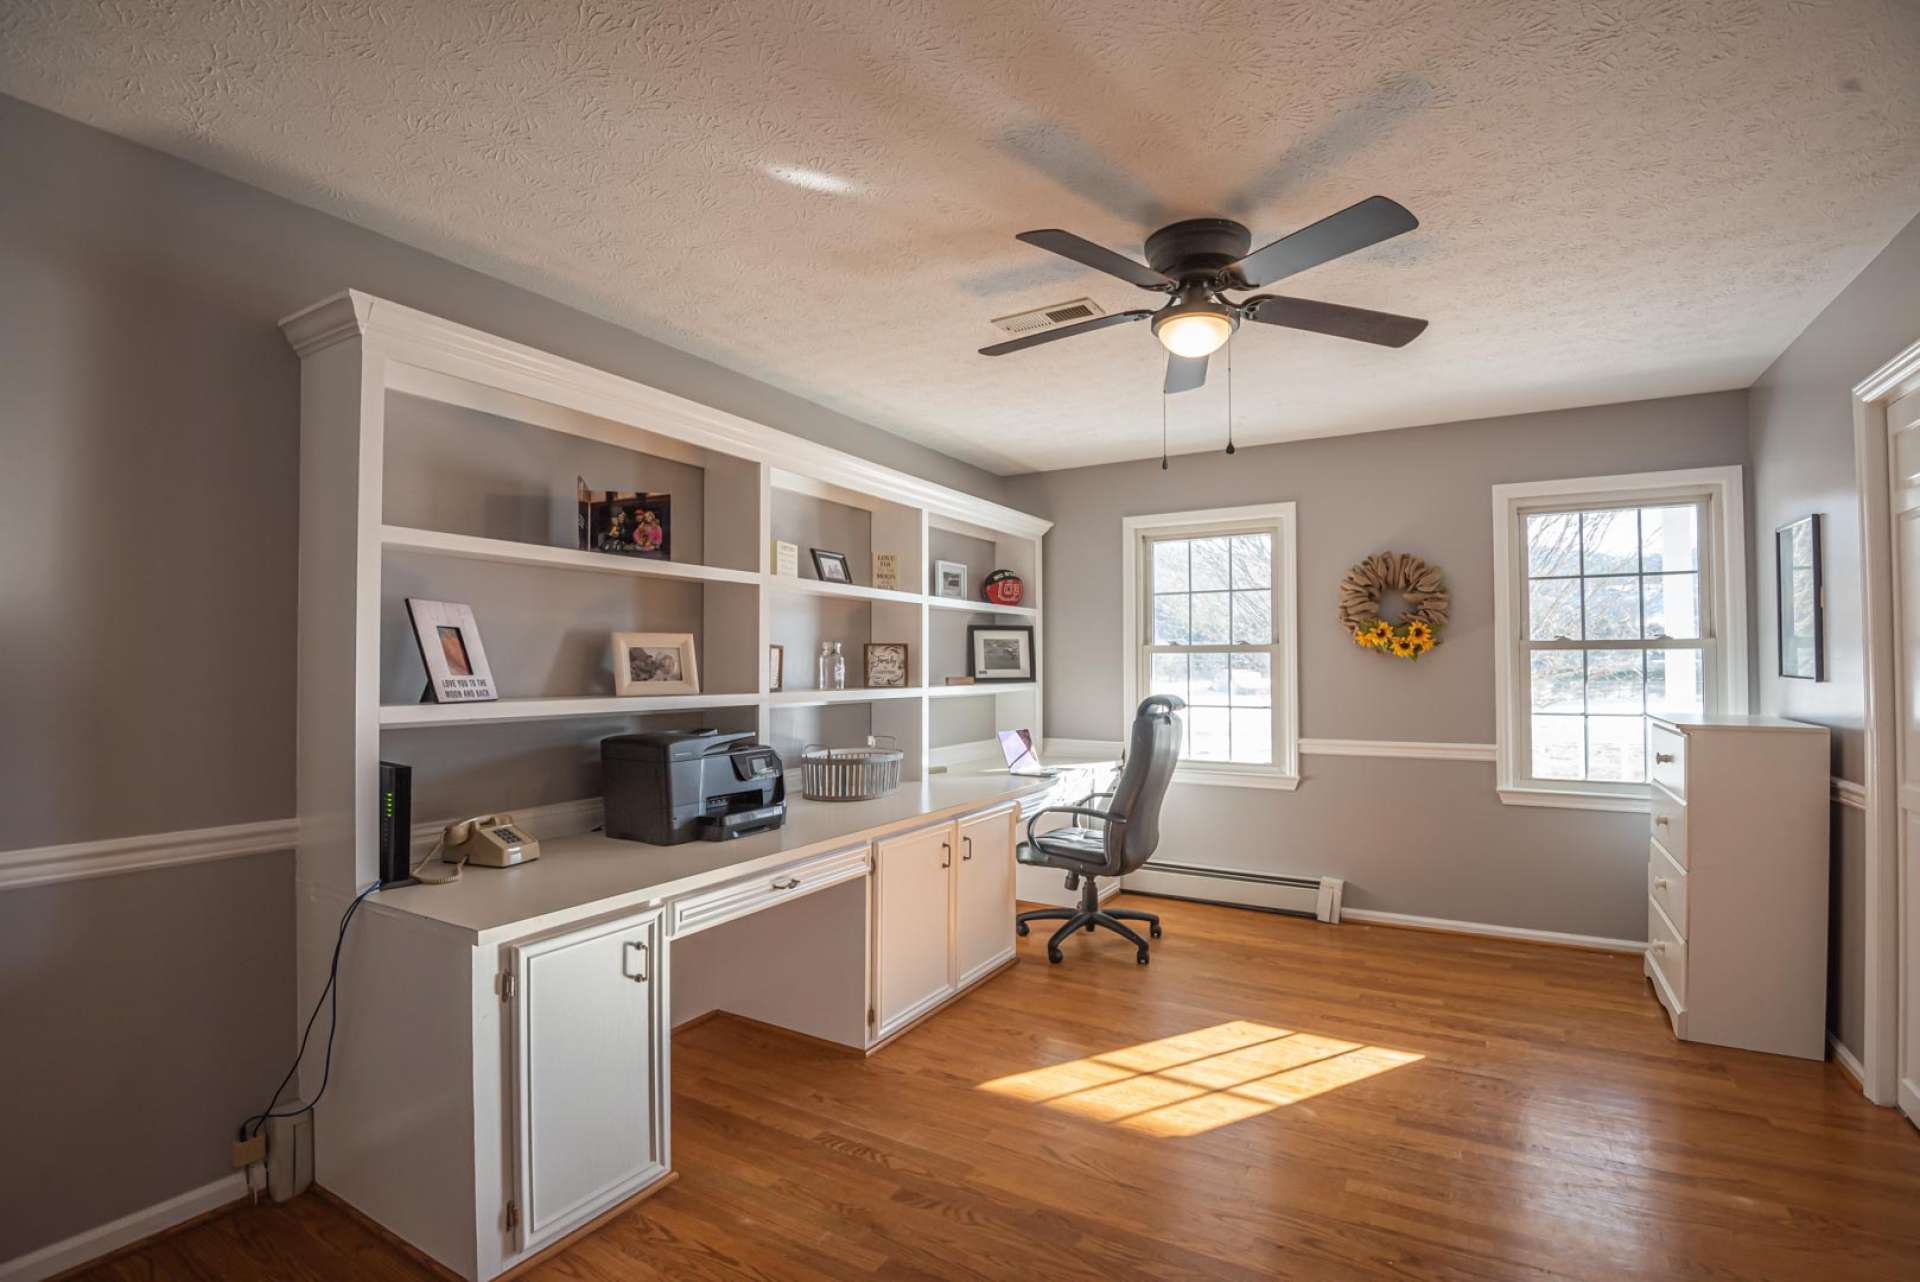 The original master bedroom has been converted into a large office with lots of windows, wood floor, and expansive storage space.